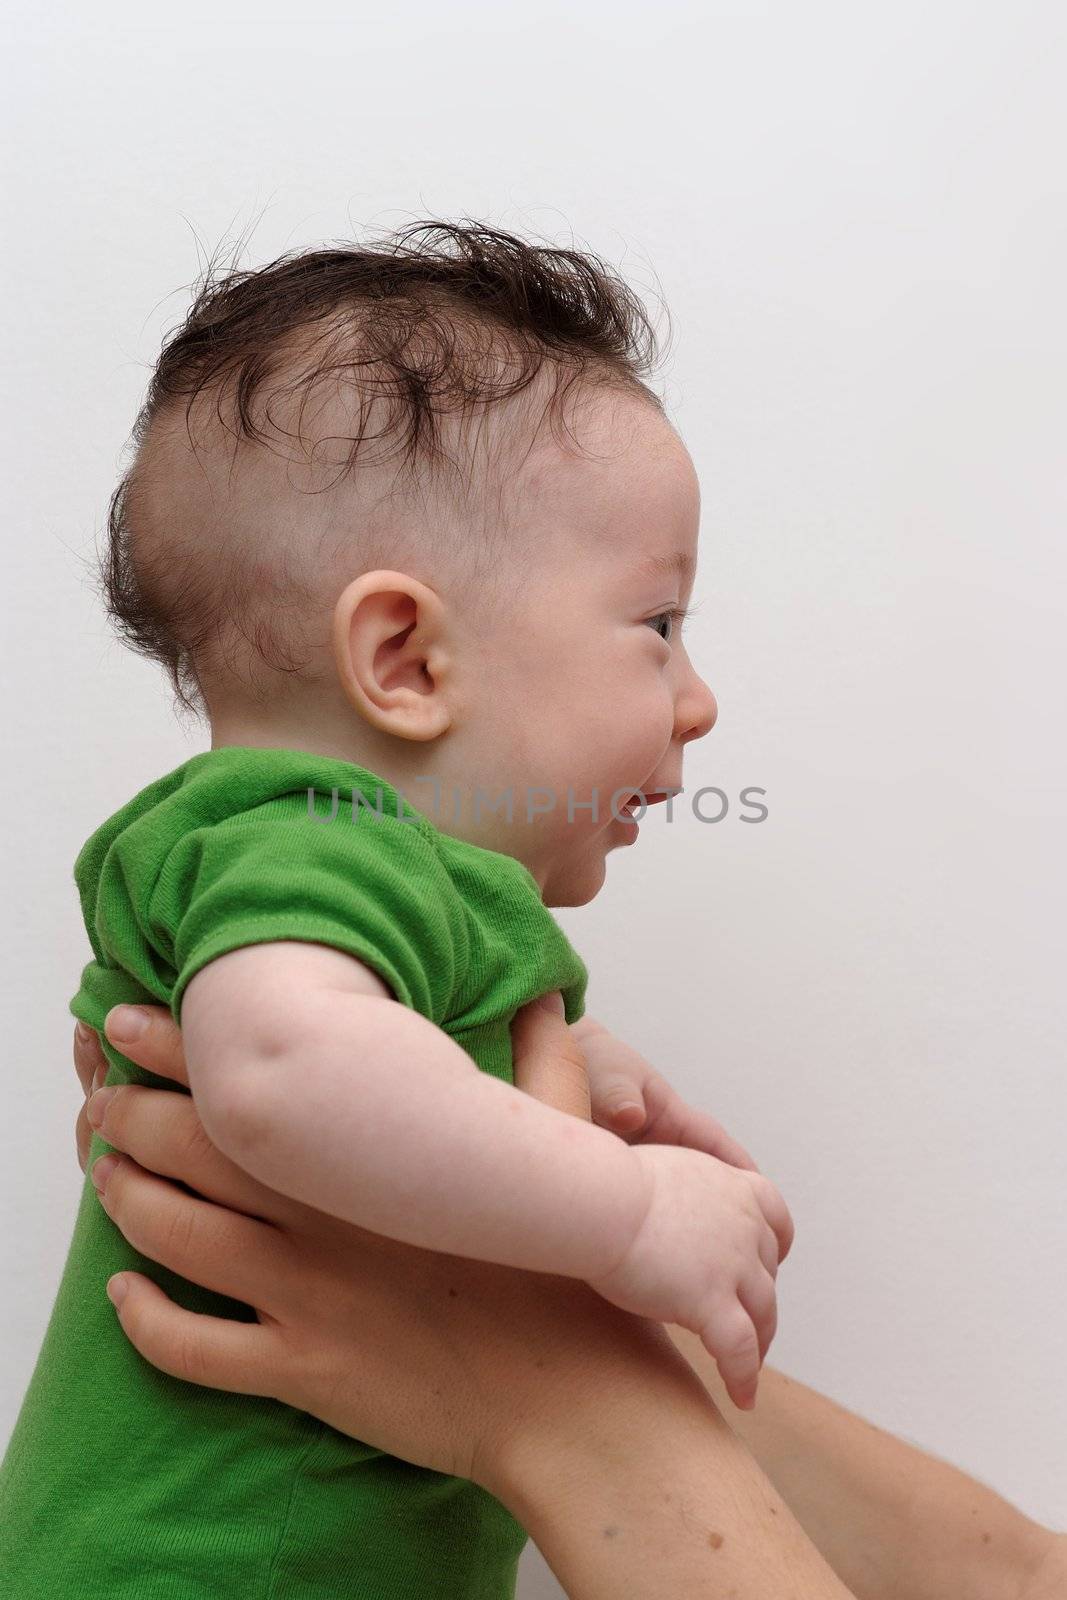 Cute smiling baby held by his mother profile view by slavapolo